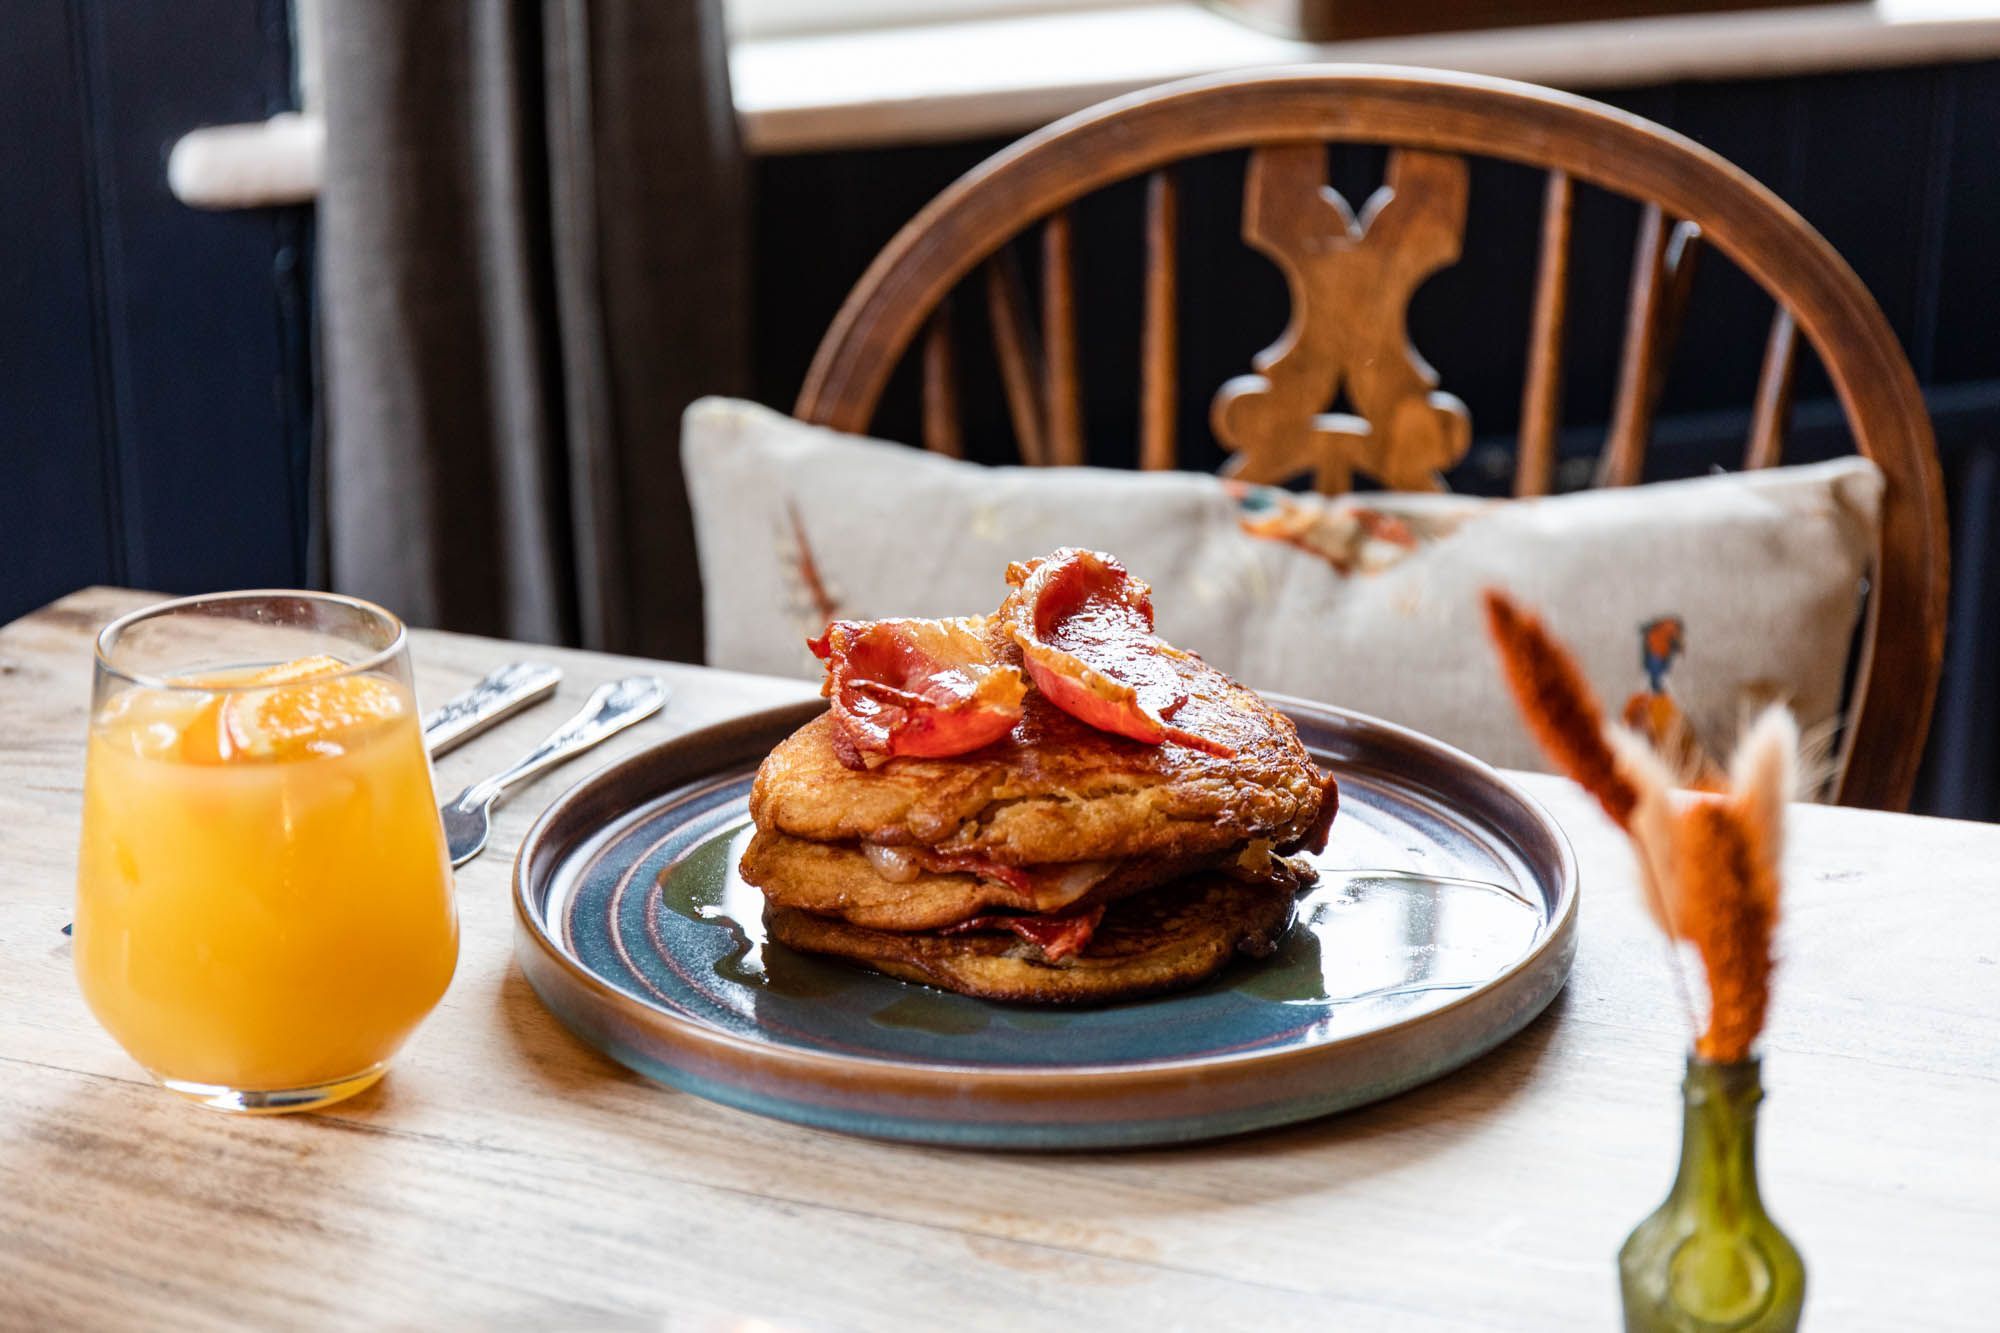 delicious looking American pancakes with bacon strips, covered on syrup and served with glass of orange juice